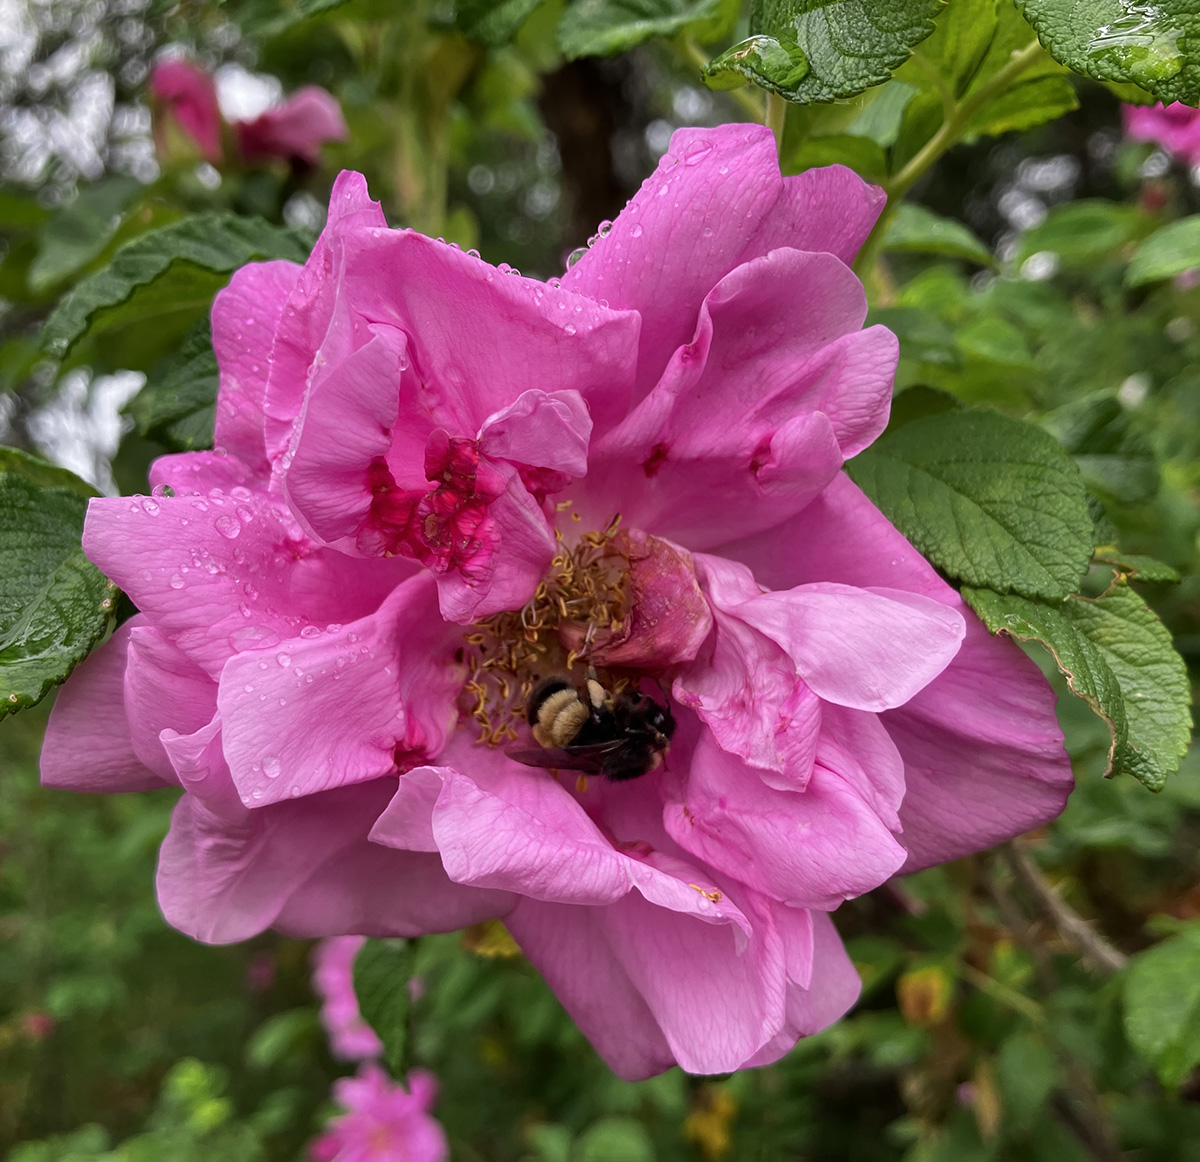 Bumble bee in pink flower